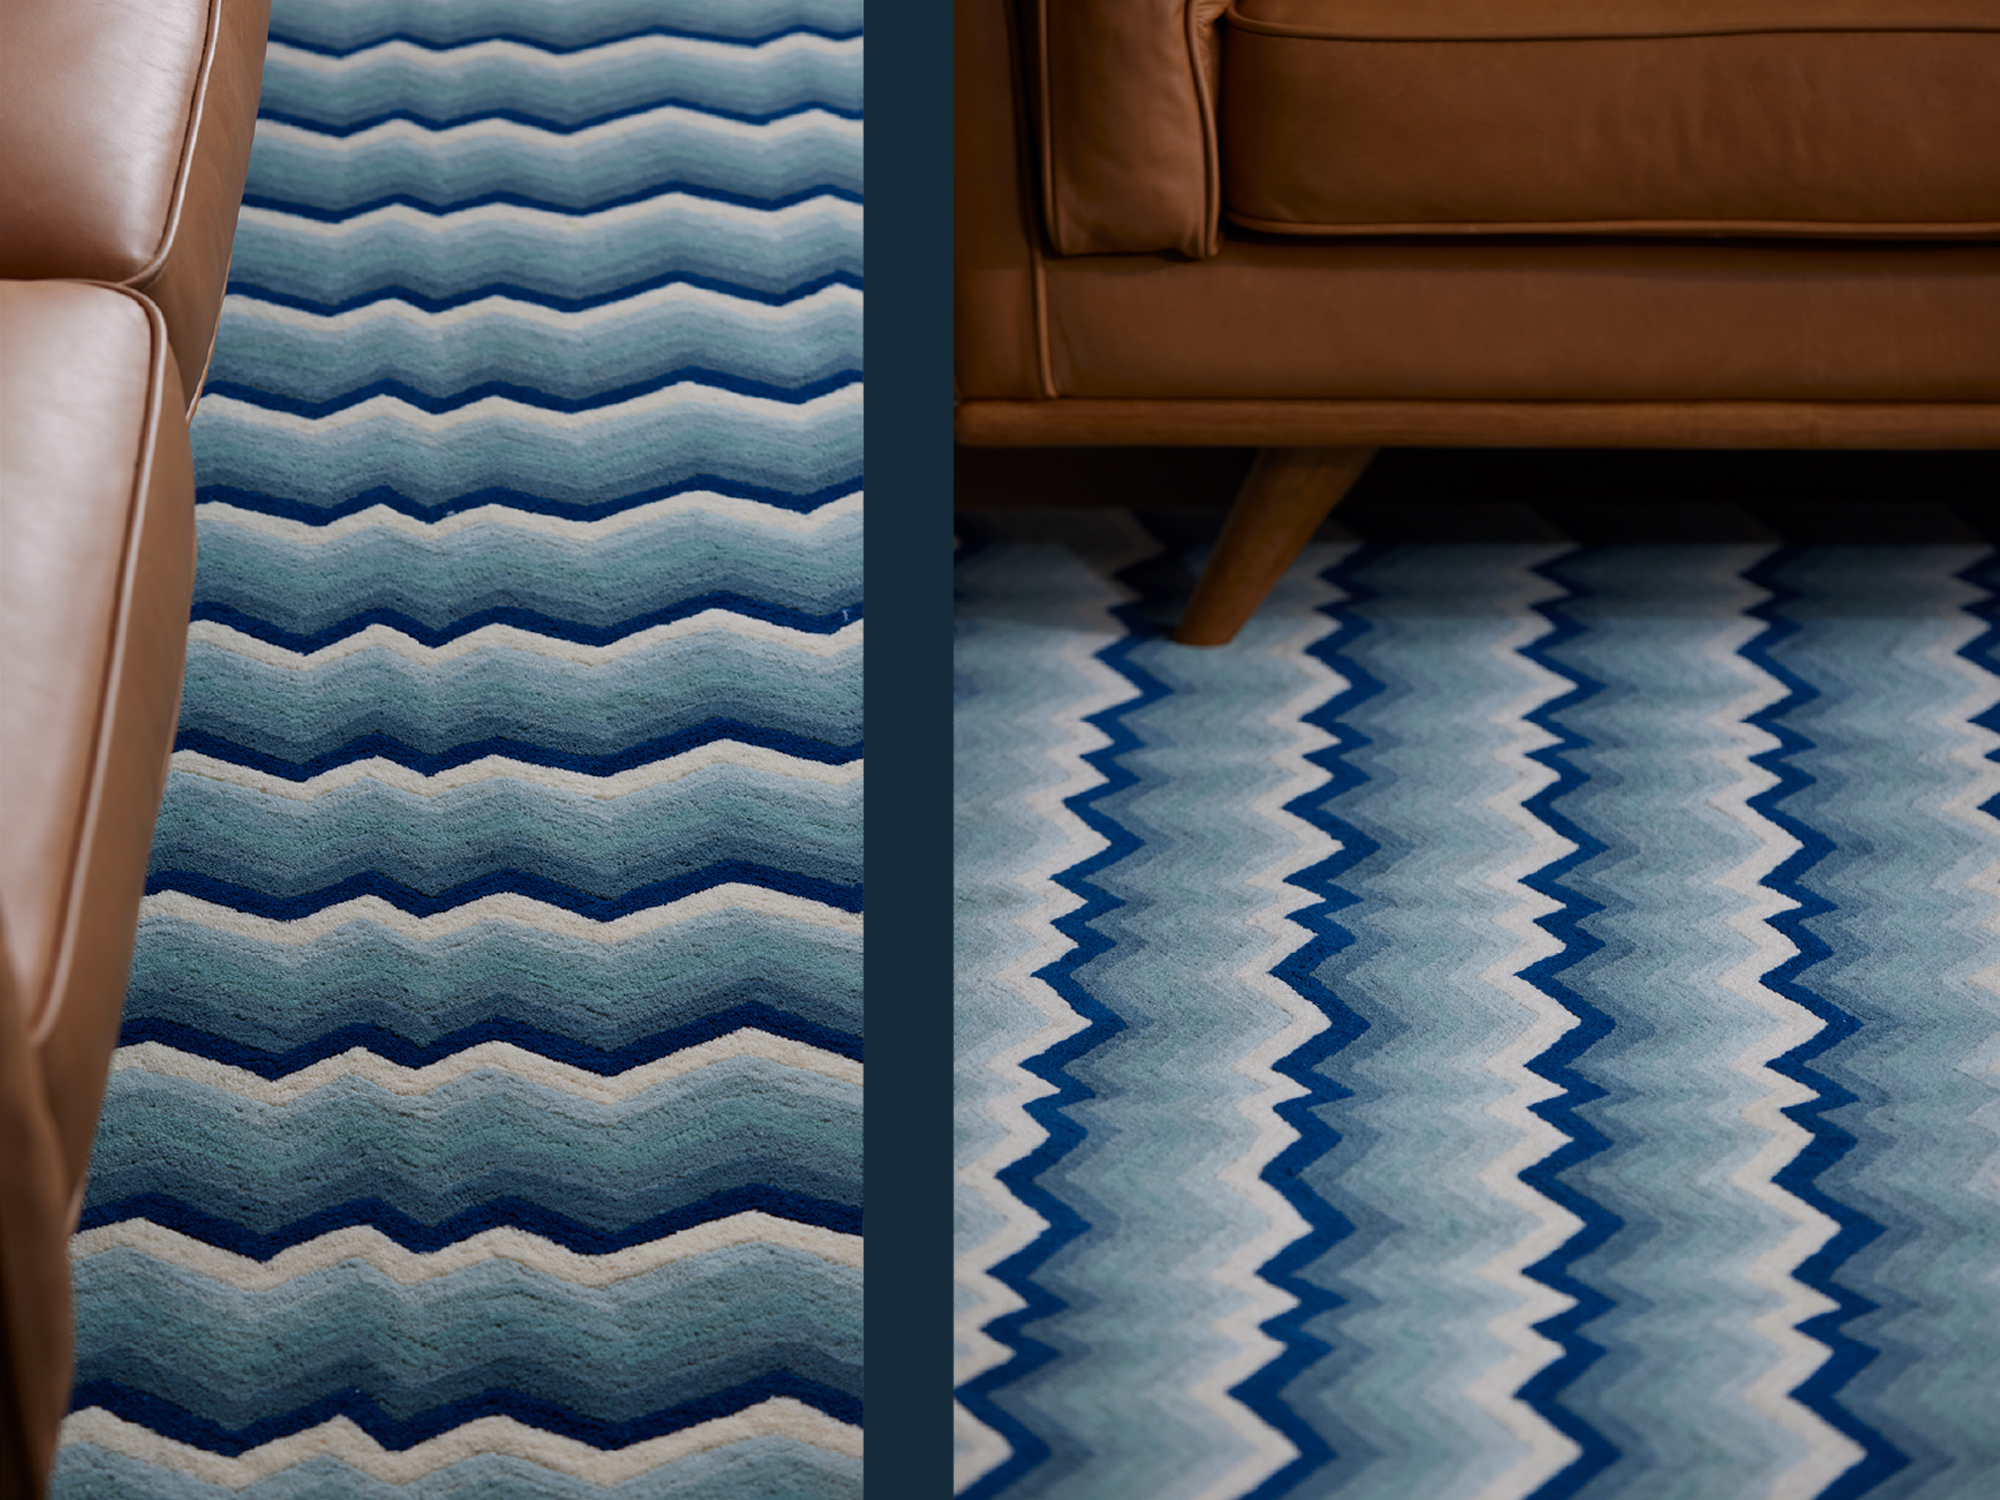 A jagged pattern in blue tones on a contemporary area rug called Buzz Blue by Angela Adams